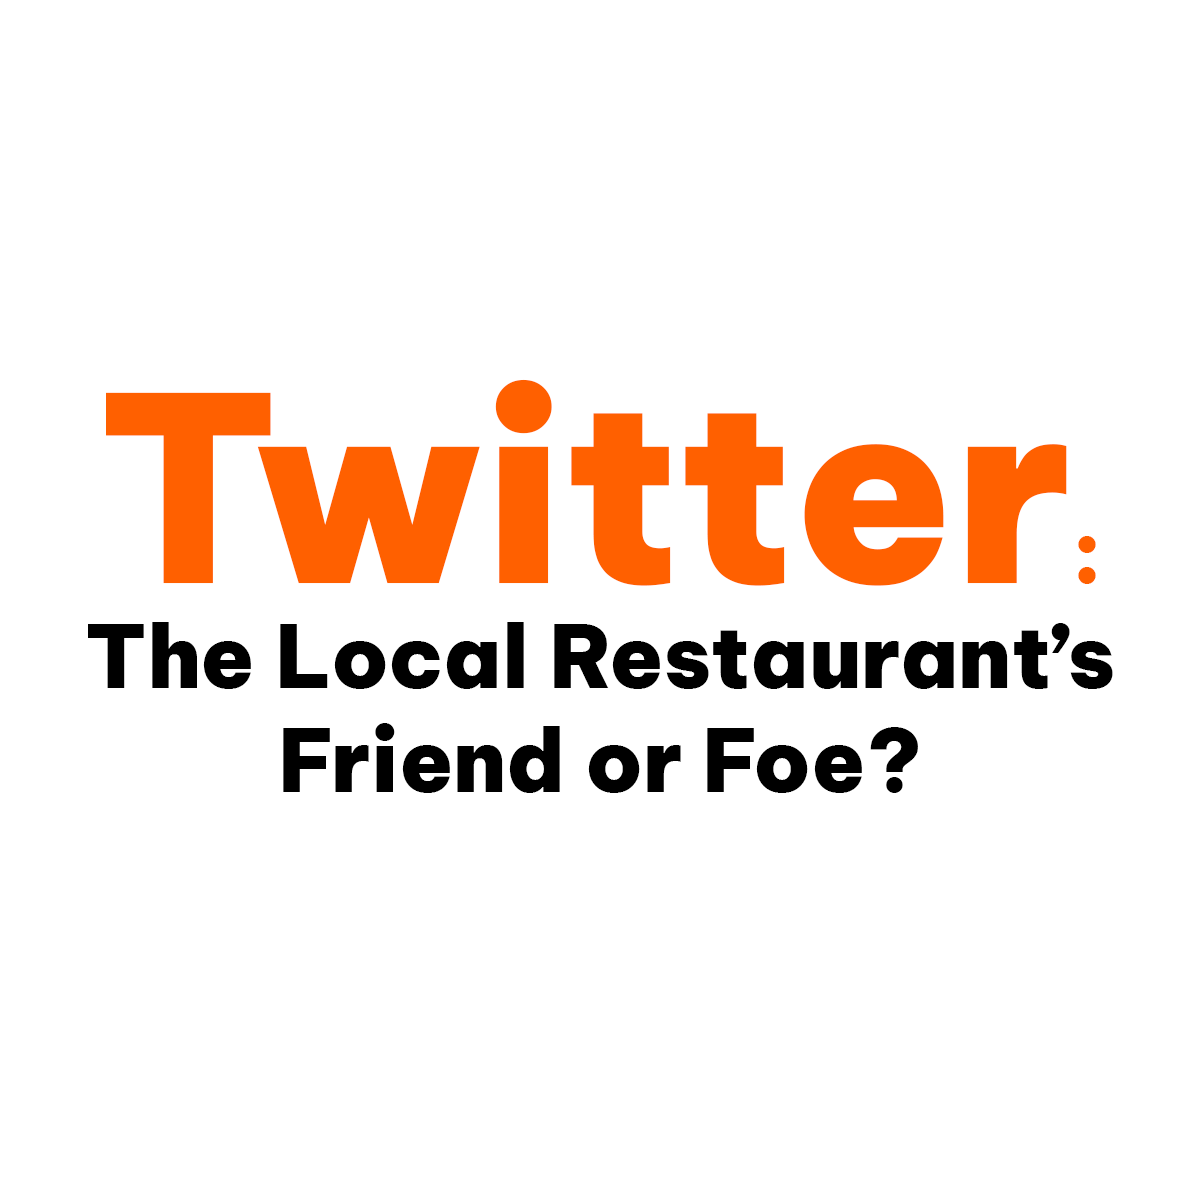 Twitter: The Local Restaurant's Friend or Foe?